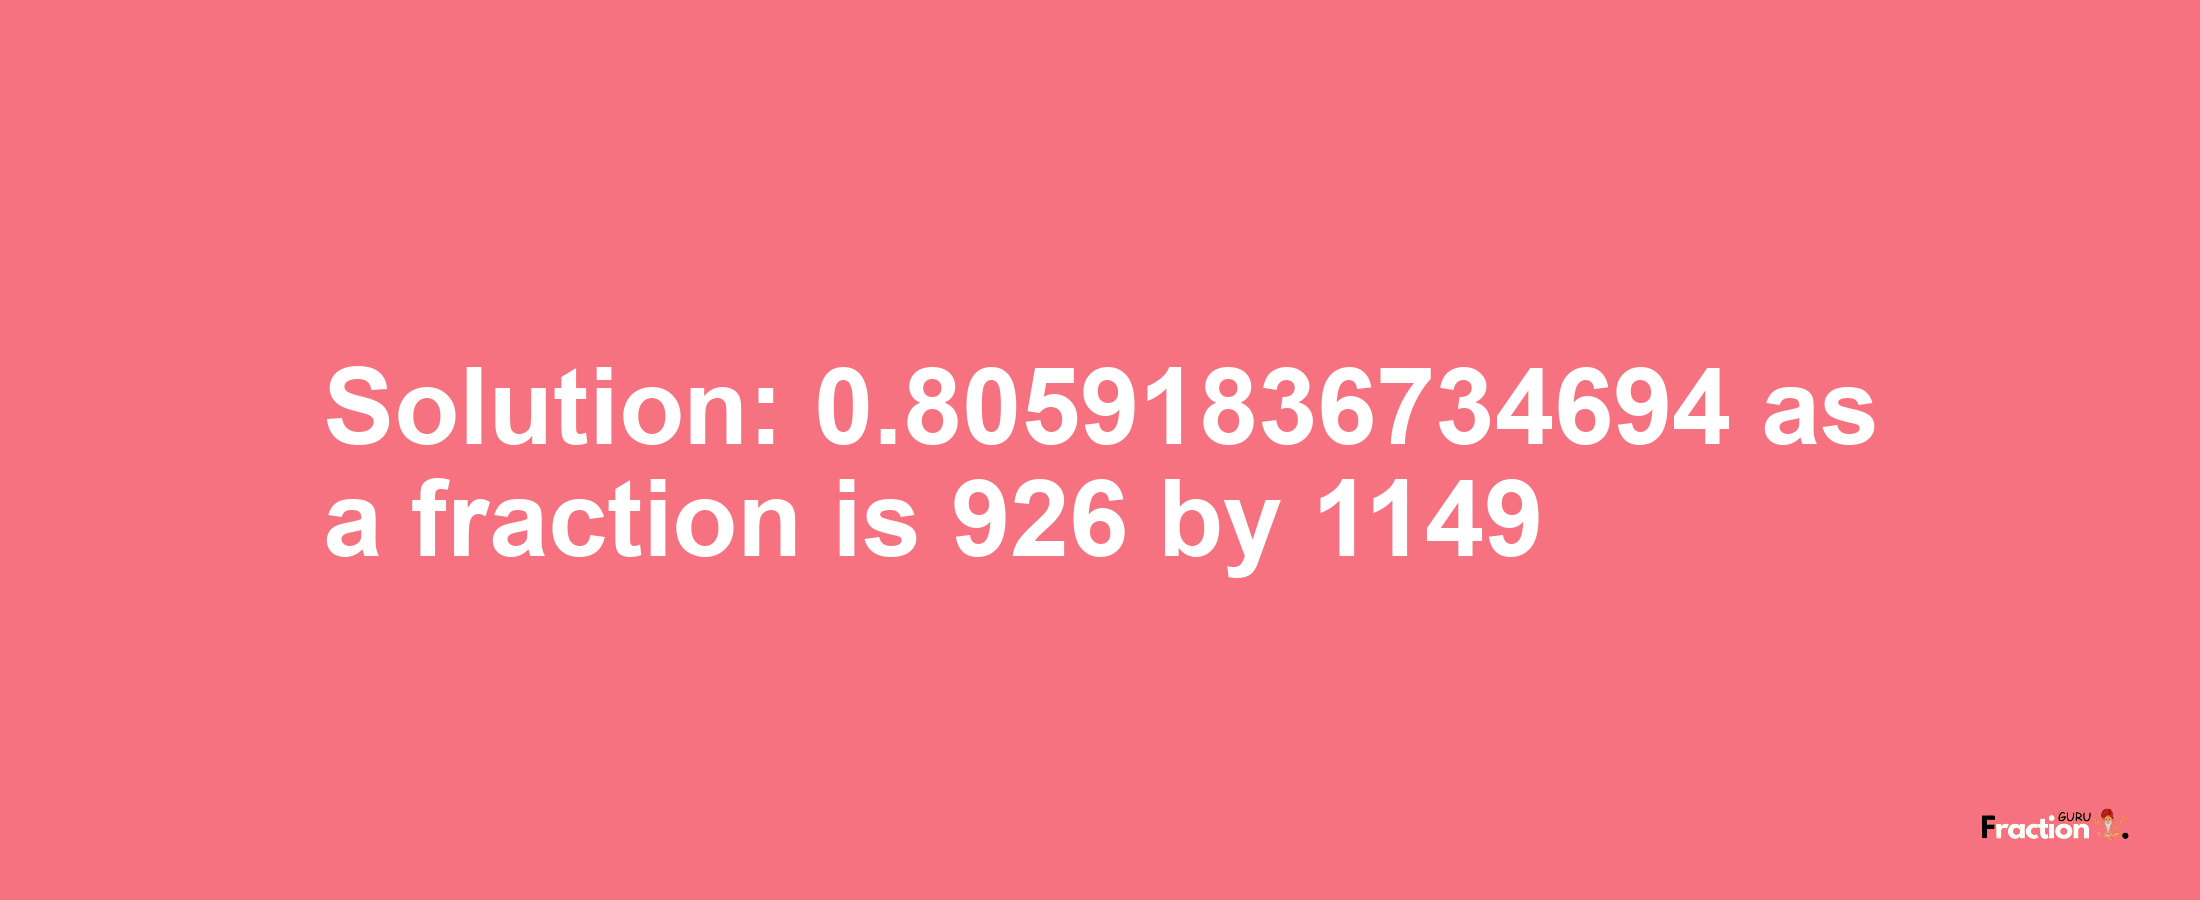 Solution:0.80591836734694 as a fraction is 926/1149